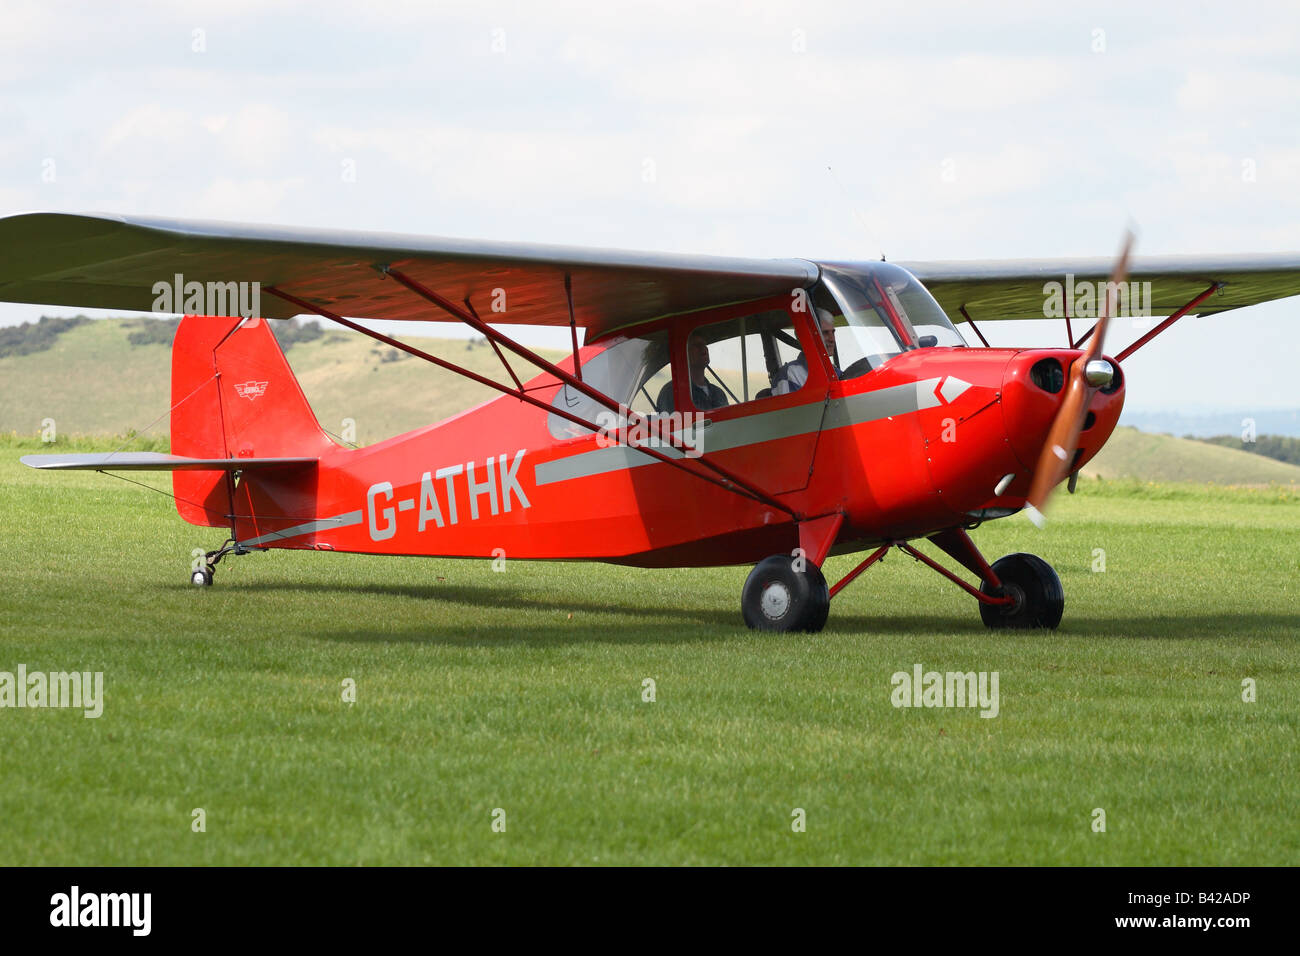 Champion vintage classic aircraft designed in the 1940s Photo - Alamy